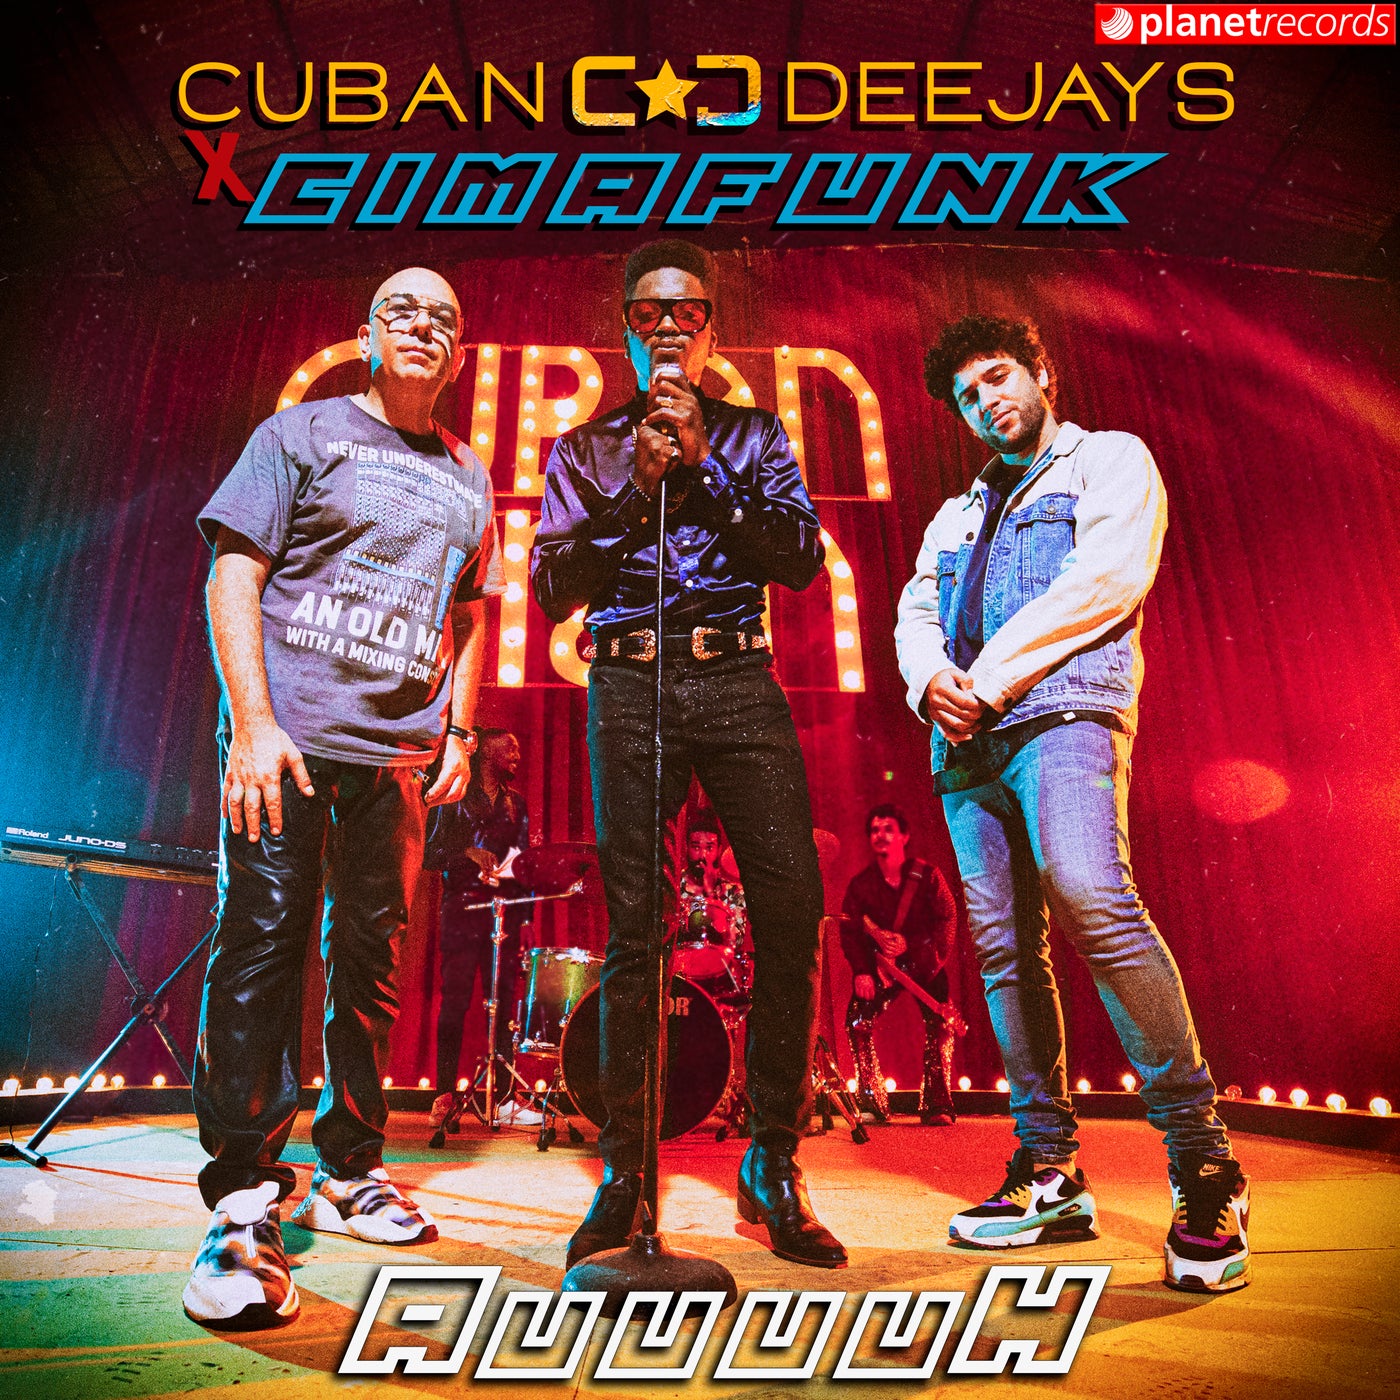 Auuuuh - Produced by Cuban Deejays